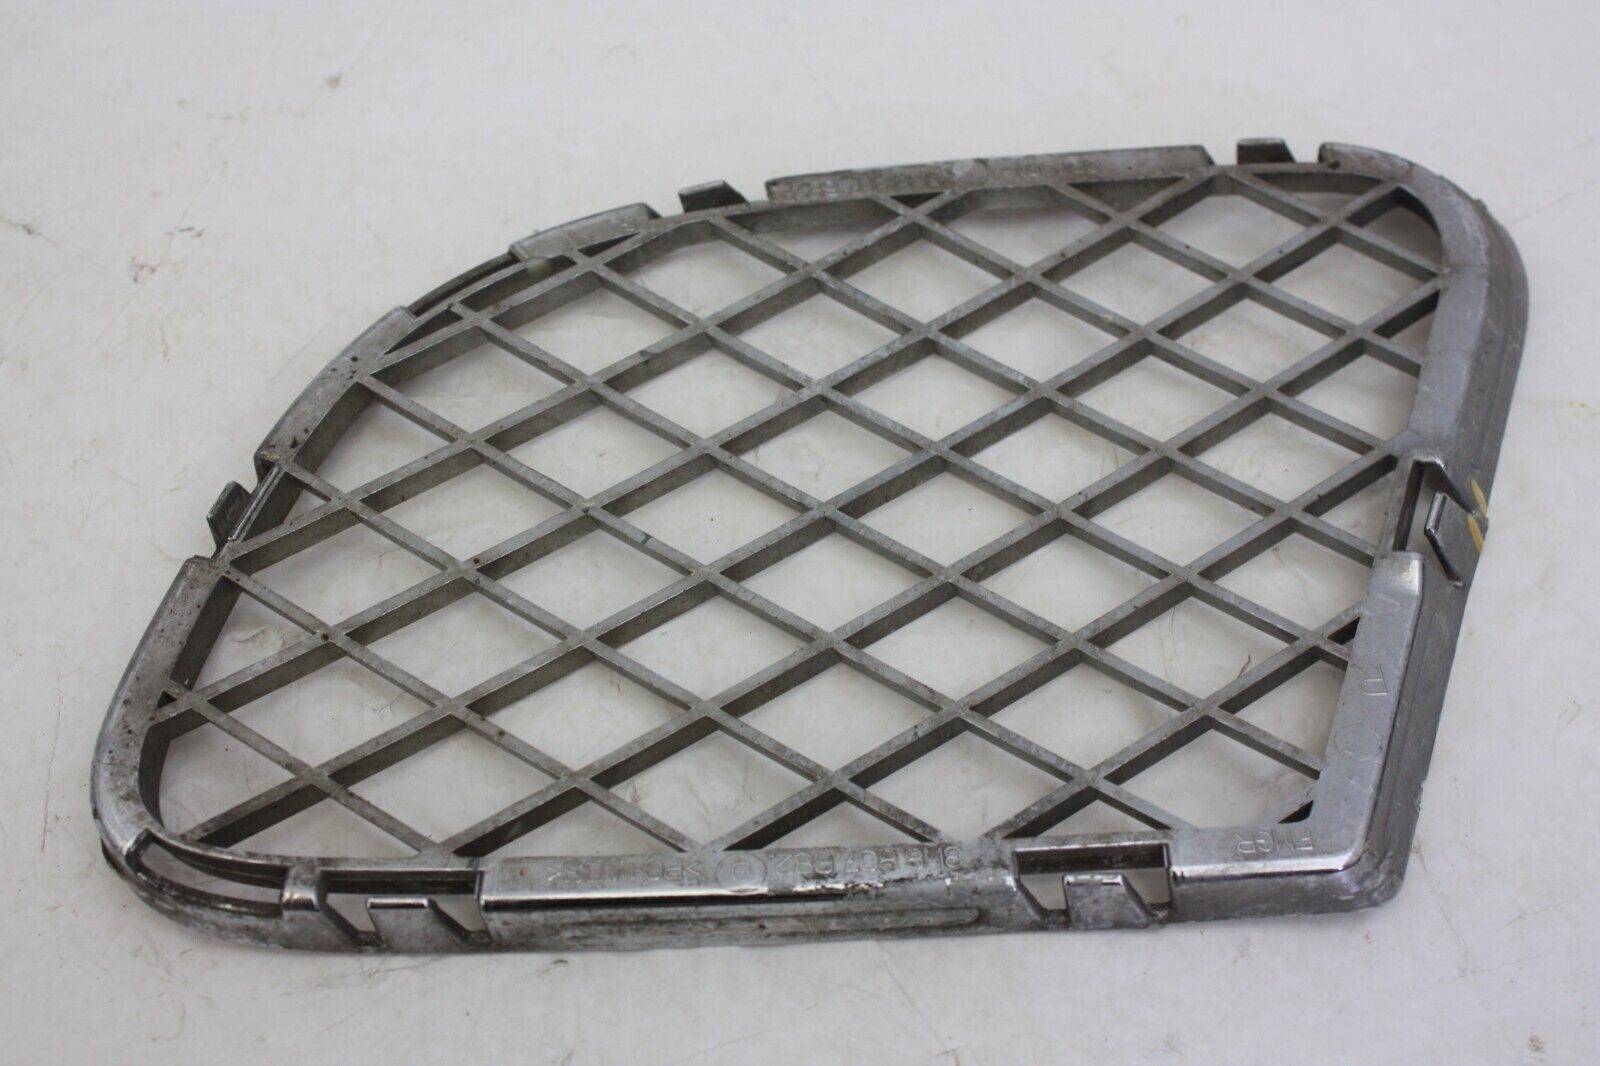 Bentley-Continental-GT-GTC-Front-Bumper-Right-Grill-2008-2011-3W8807682D-Genuine-176270606618-7